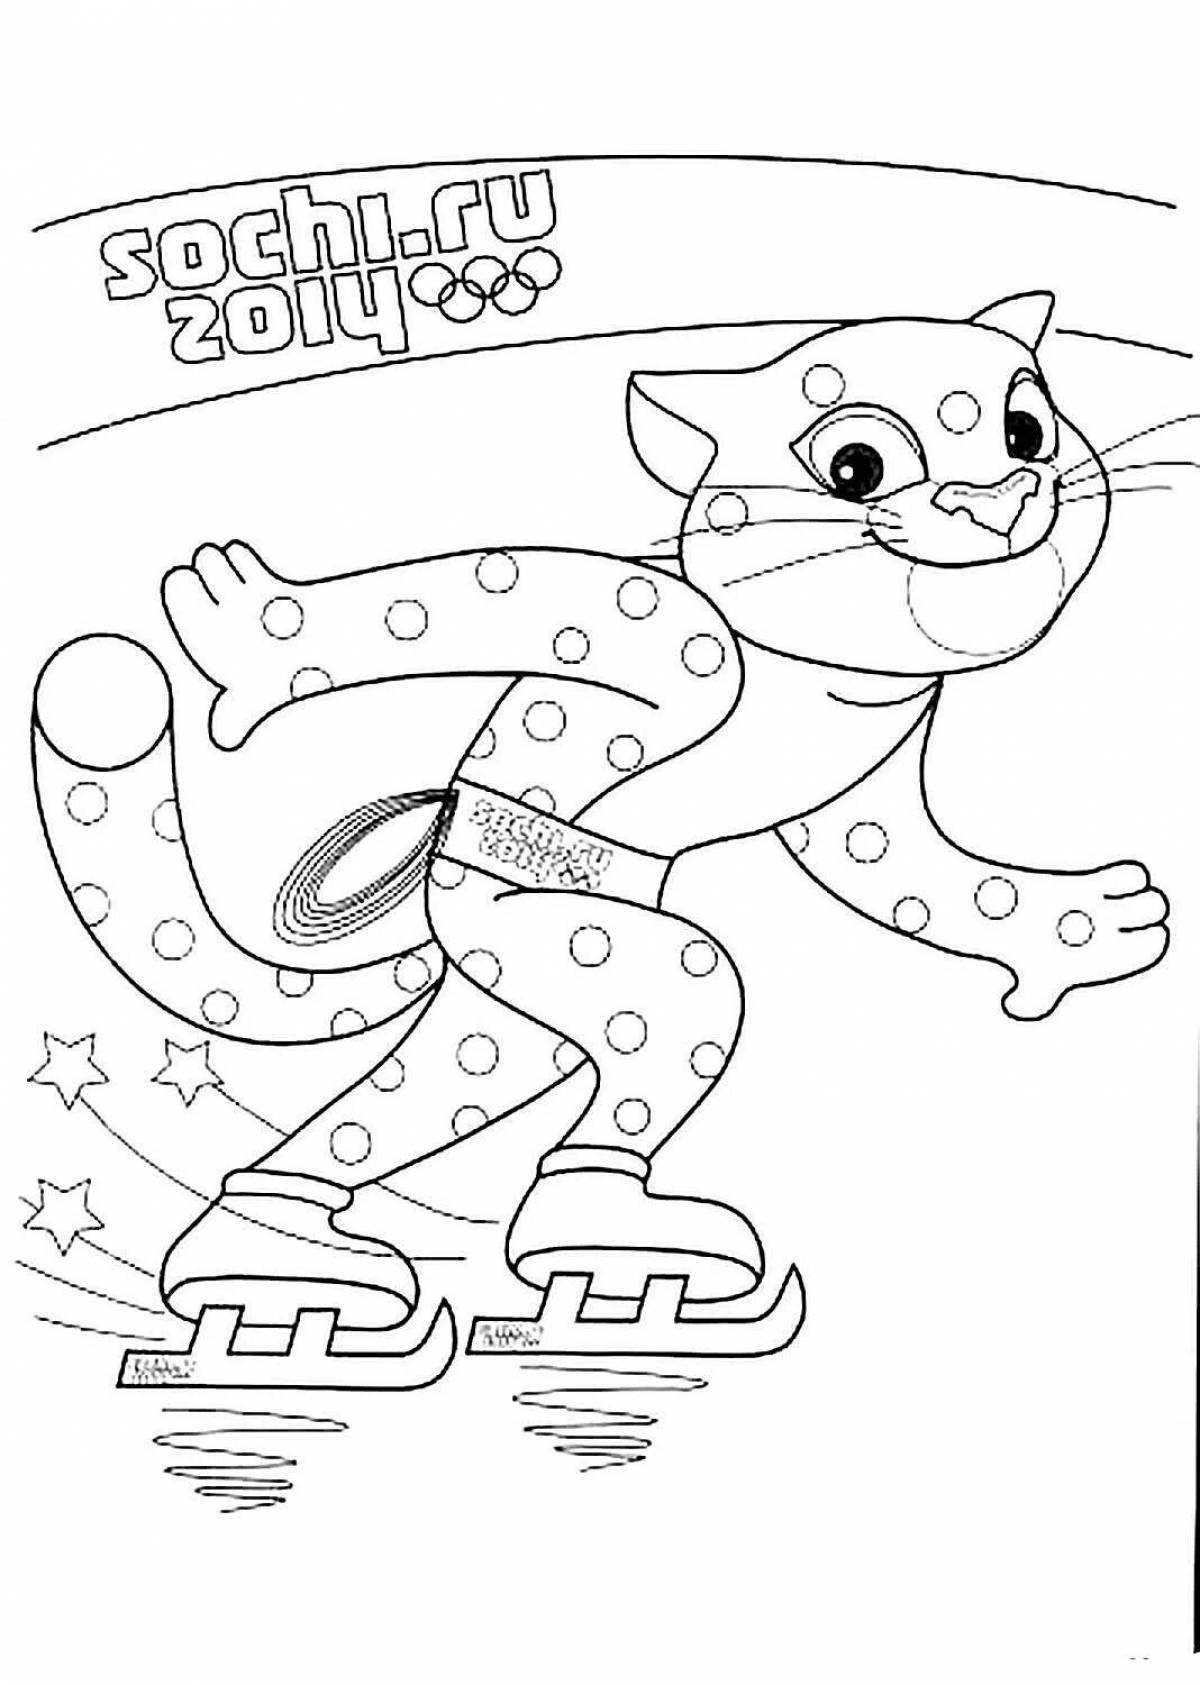 Colorful winter olympics coloring book